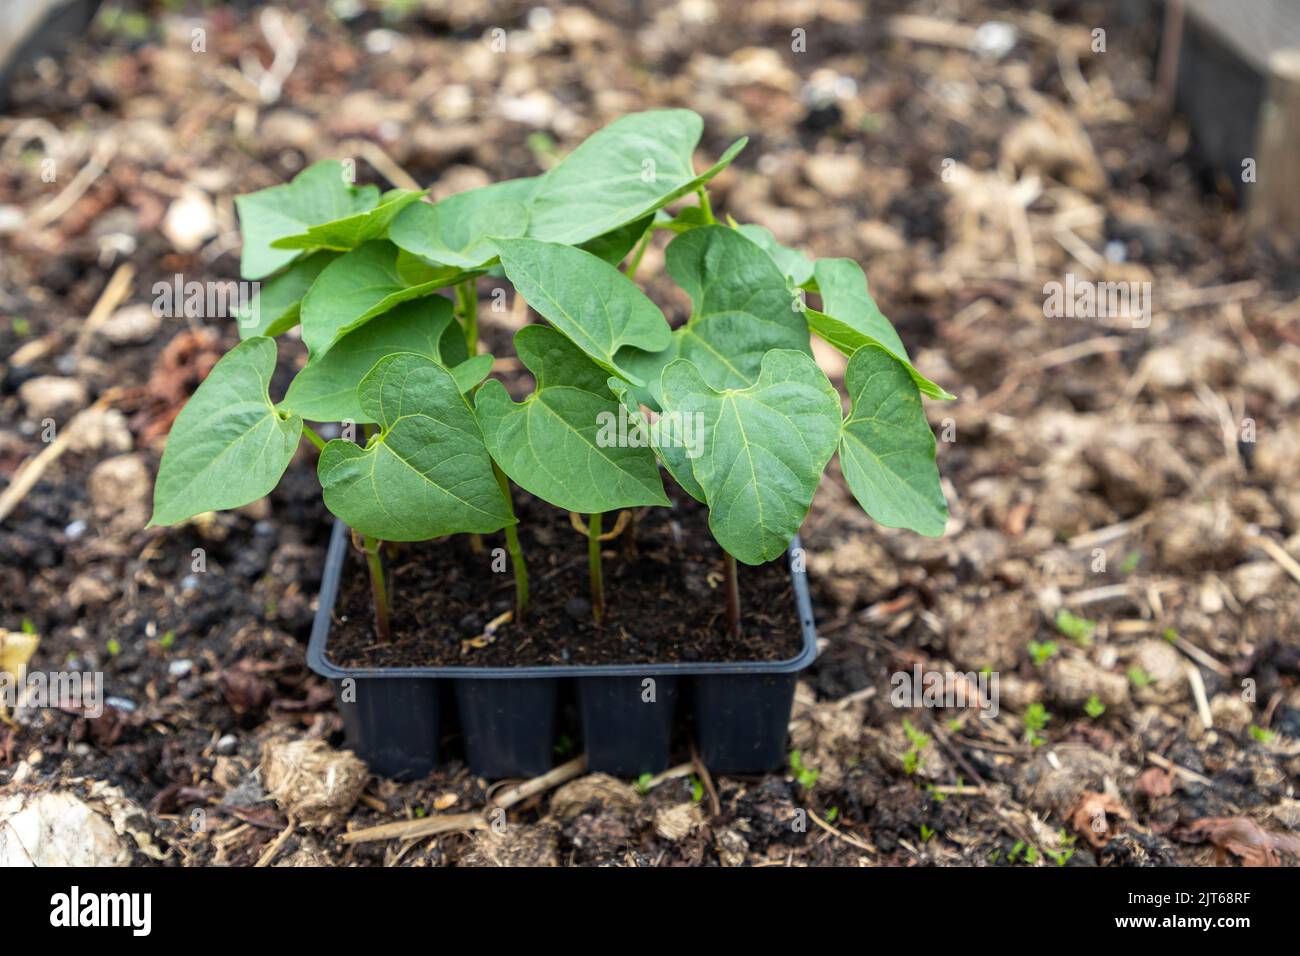 Selective focus on bean seedlings in a black plastic tray standing on a well manured garden bed. Stock Photo